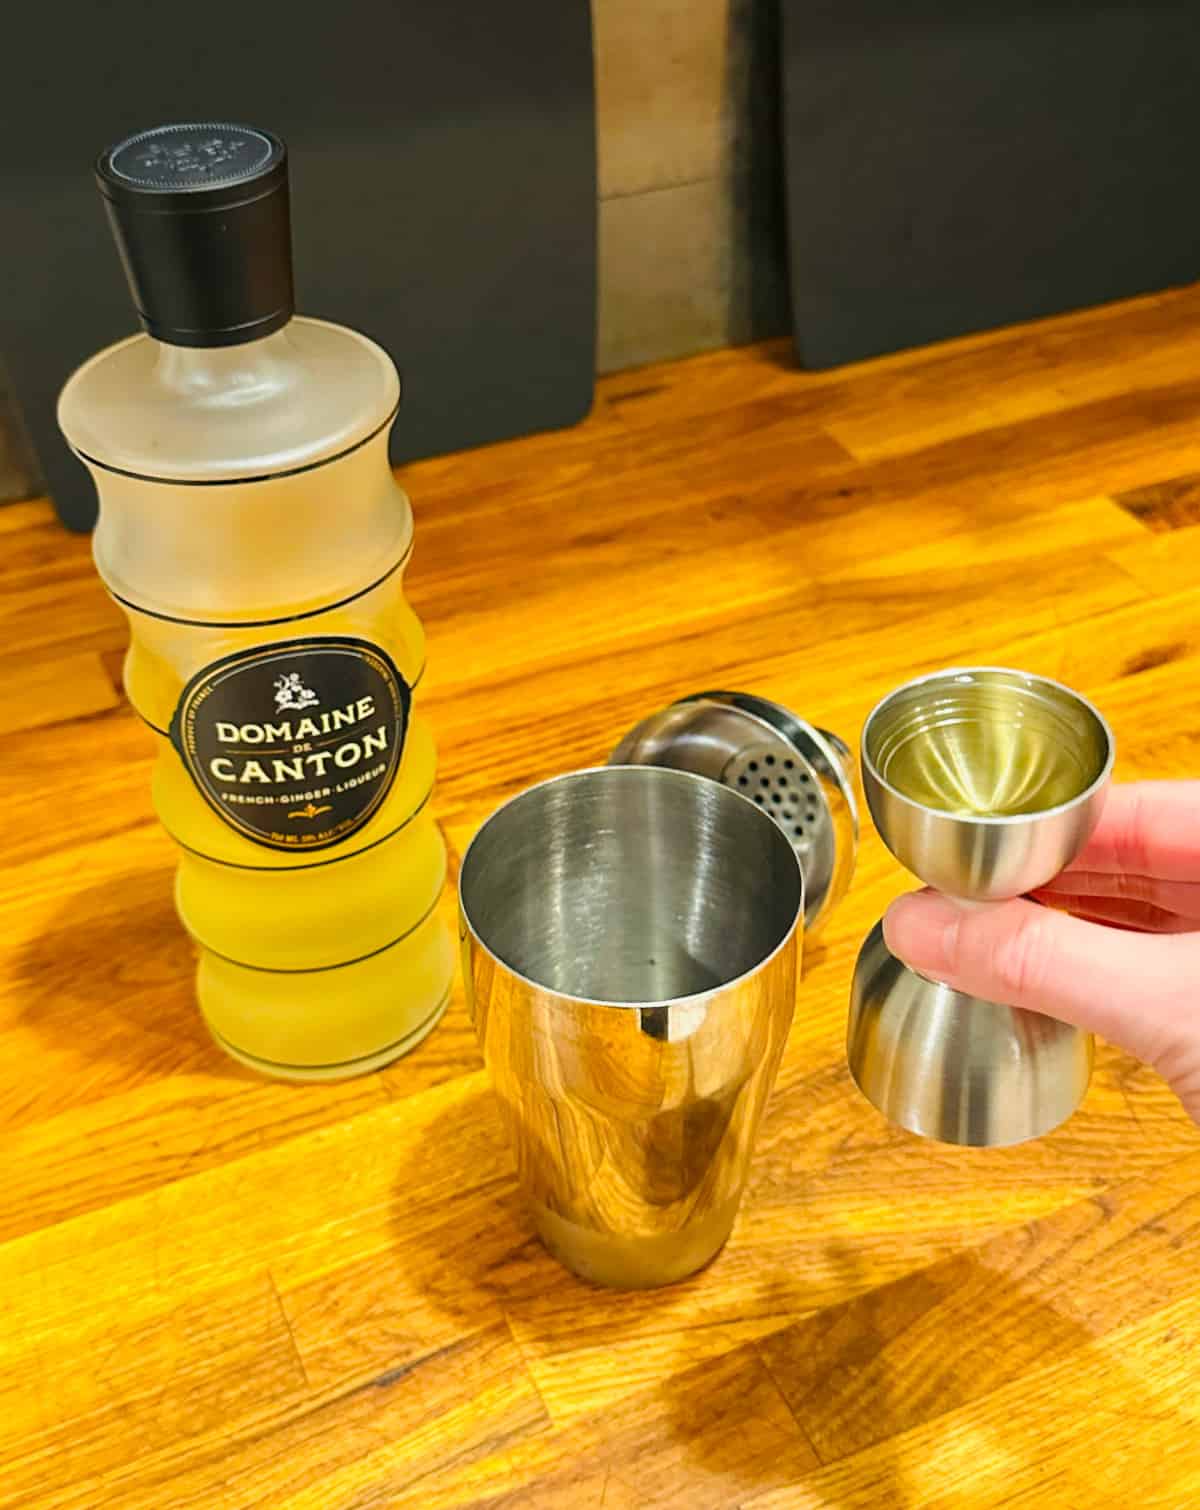 Pale yellow liquid in a steel measuring jigger next to a cocktail shaker and a bottle of Domaine de Canton ginger liqueur.